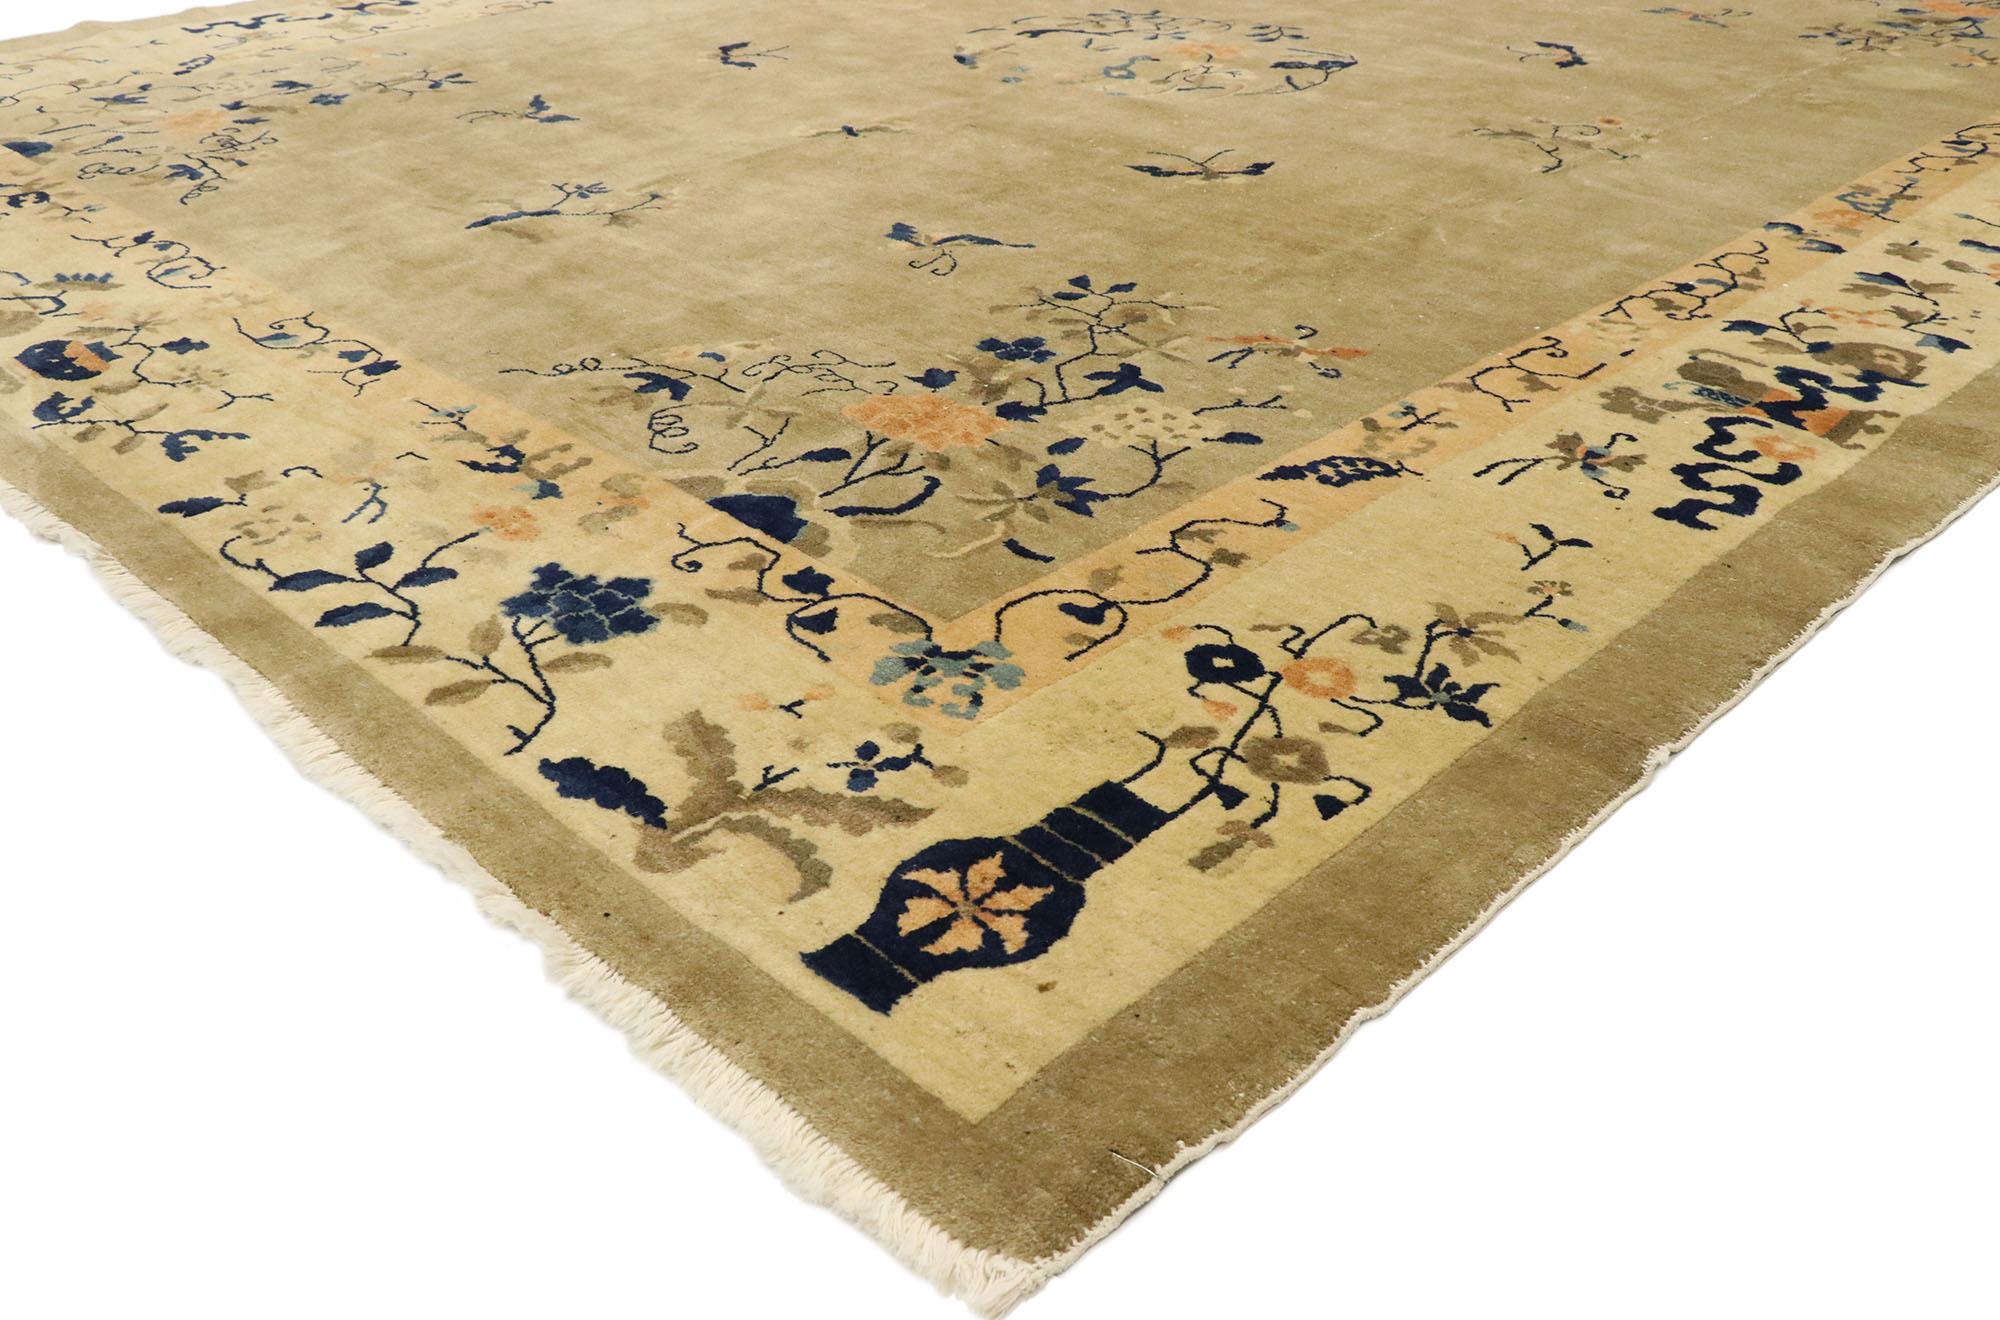 77445 antique Chinese Peking rug with chinoiserie Art Deco style. This hand knotted wool antique Chinese Peking rug features a rounded open medallion decorated with a lotus blossom, peonies, leafy tendrils, and a heron bird standing in a marsh